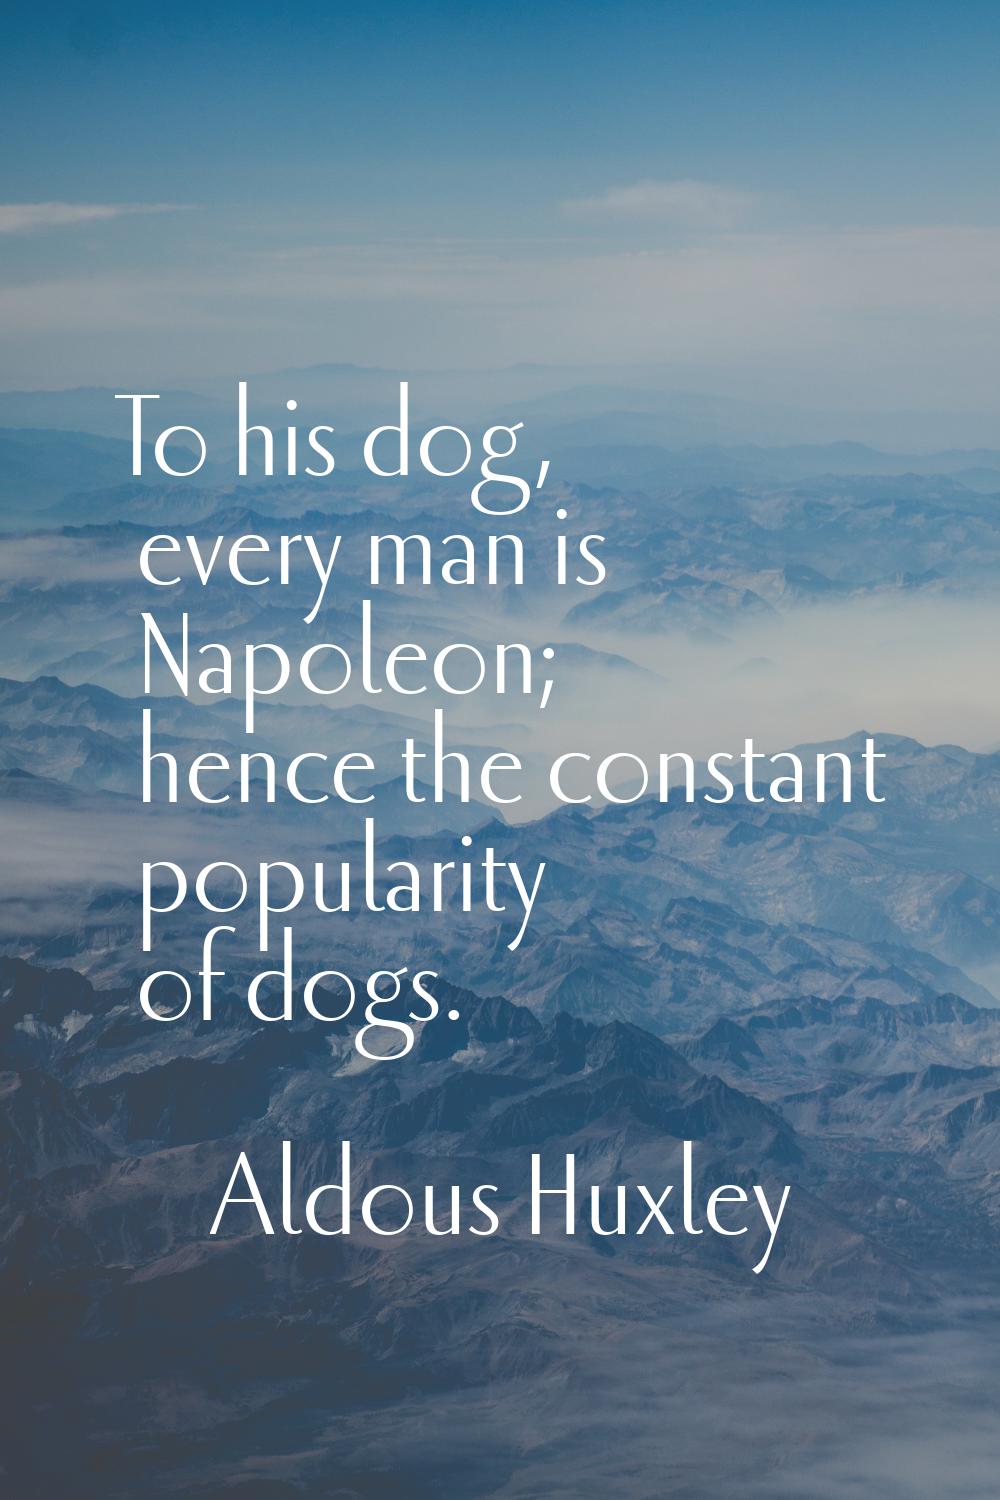 To his dog, every man is Napoleon; hence the constant popularity of dogs.